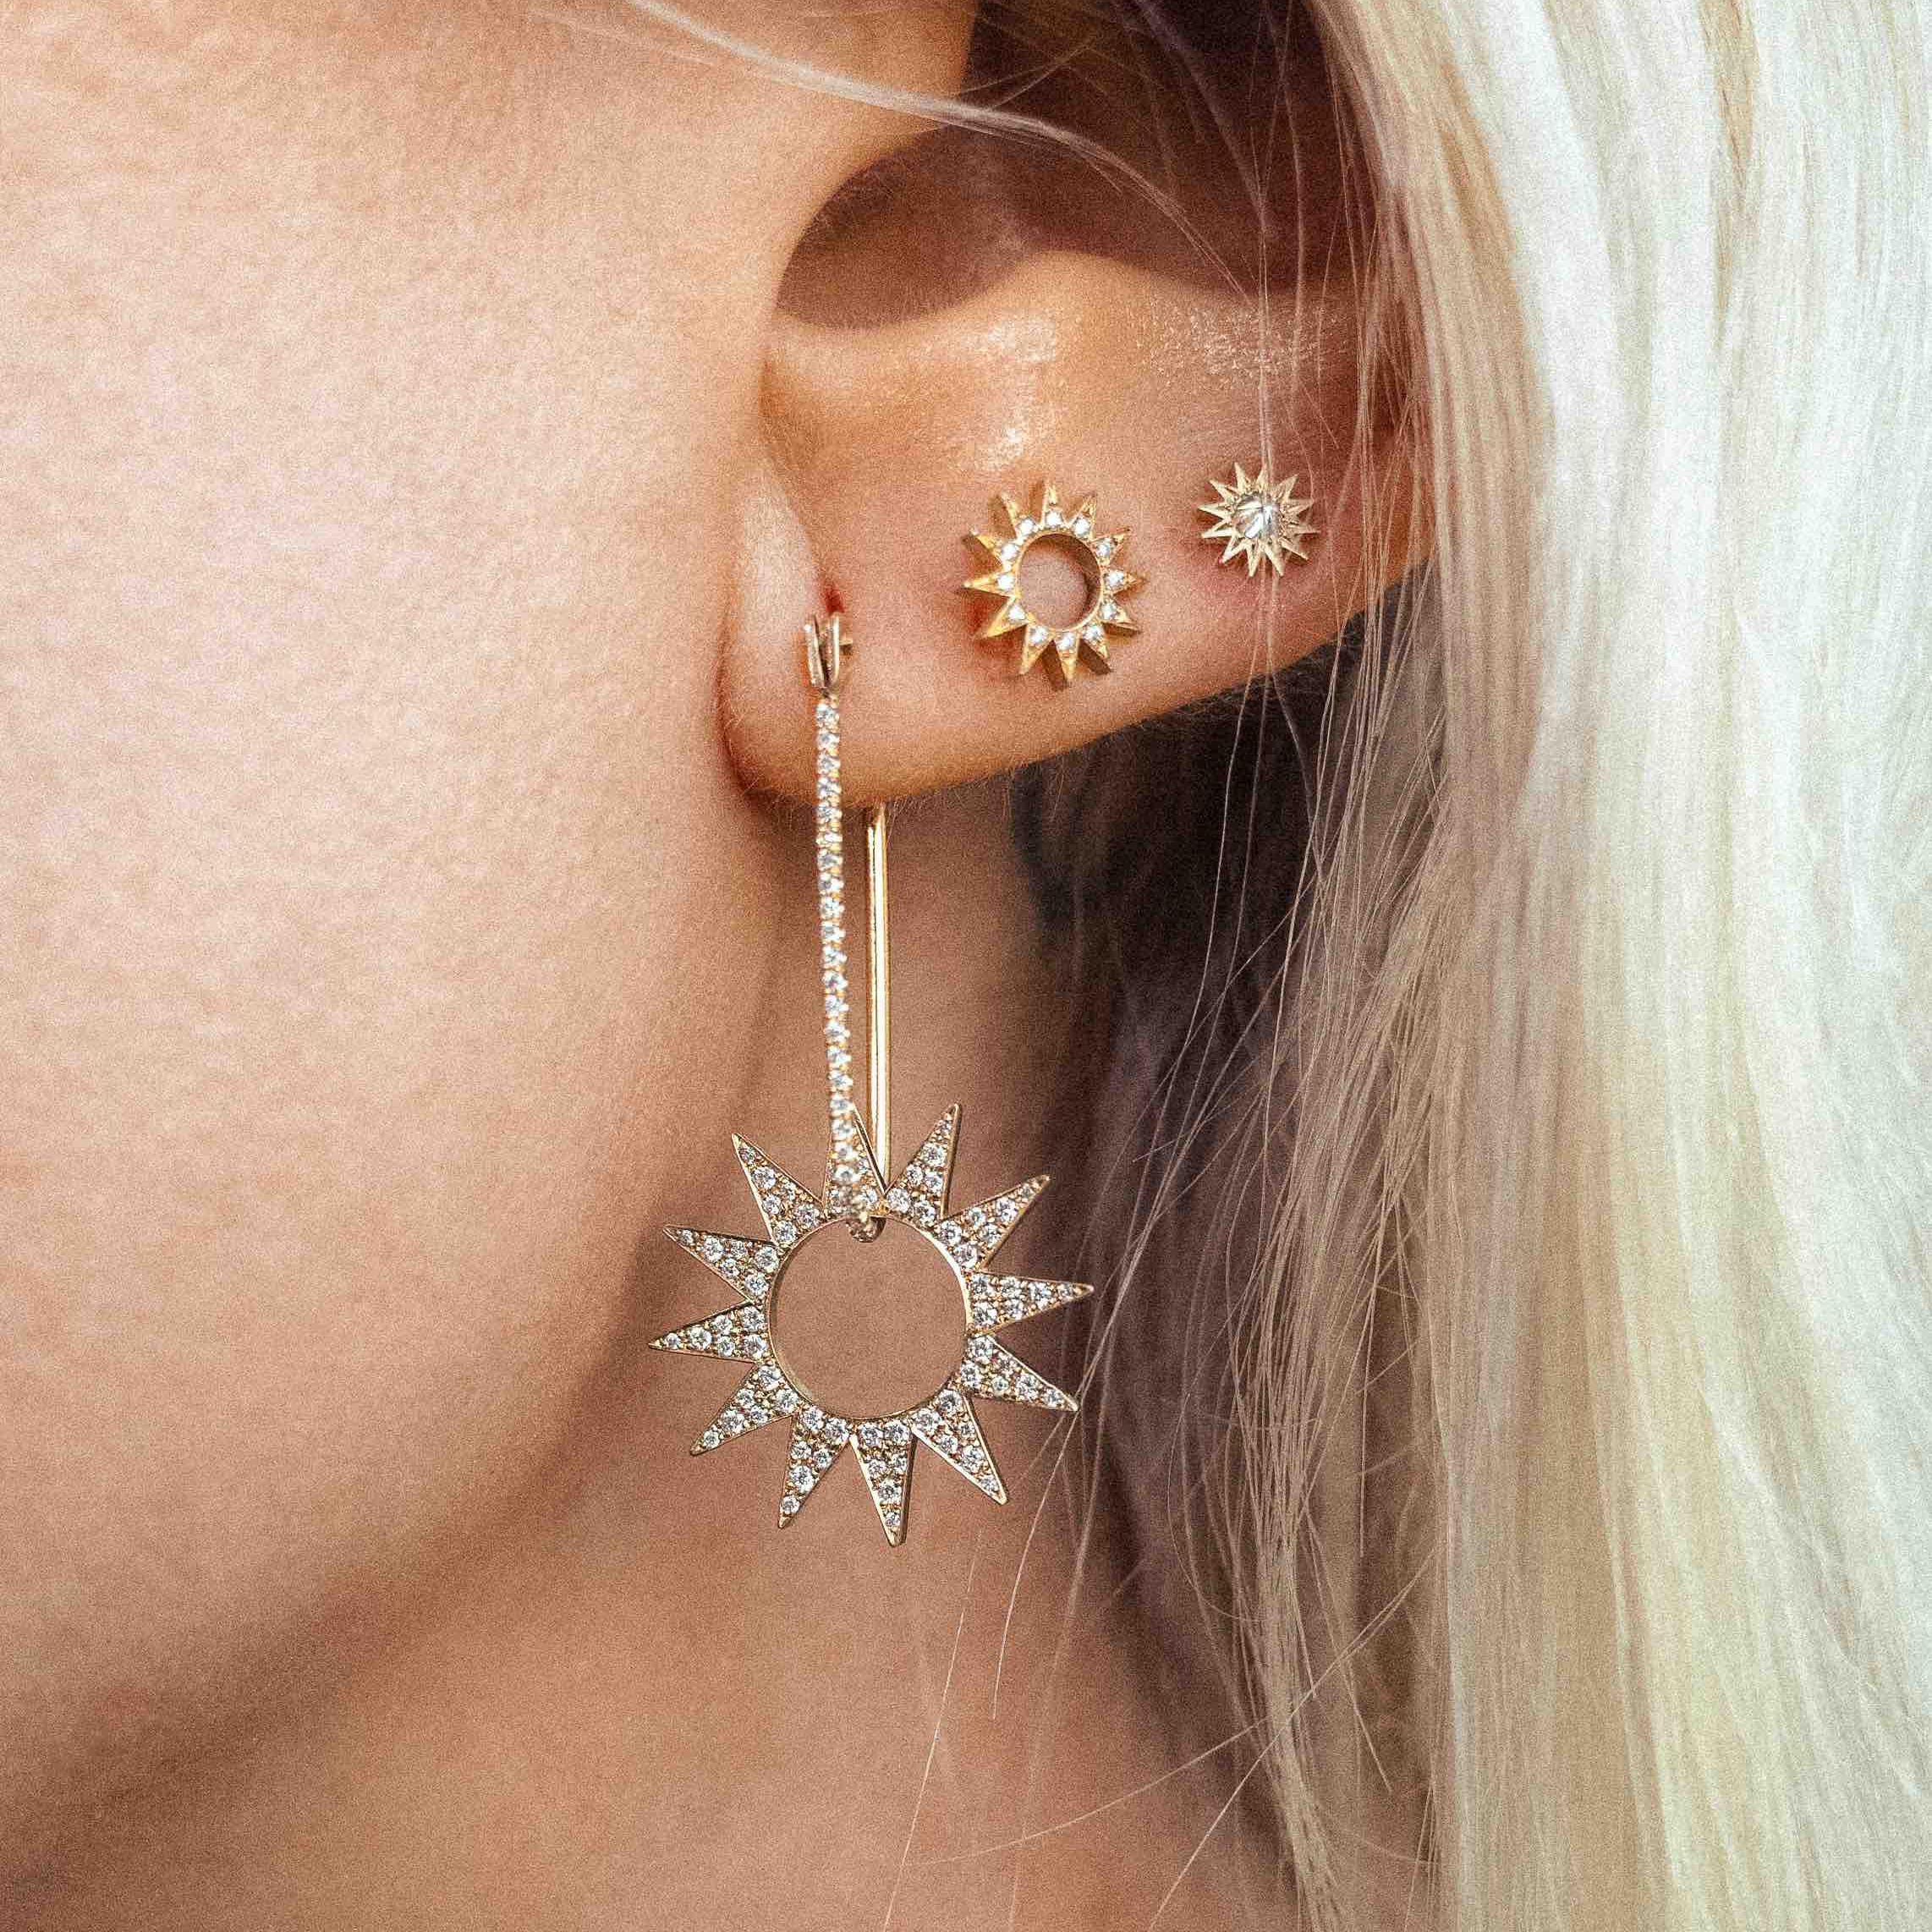 The Pavé Spur Earring – designed and handmade by EMBLM Fine Jewelry

The twelve point star shape of the Pavé Spur Earring Charm moves freely within the handmade oblong hoop of the Pavé Latch Earring. The two pieces can also be worn separately – the